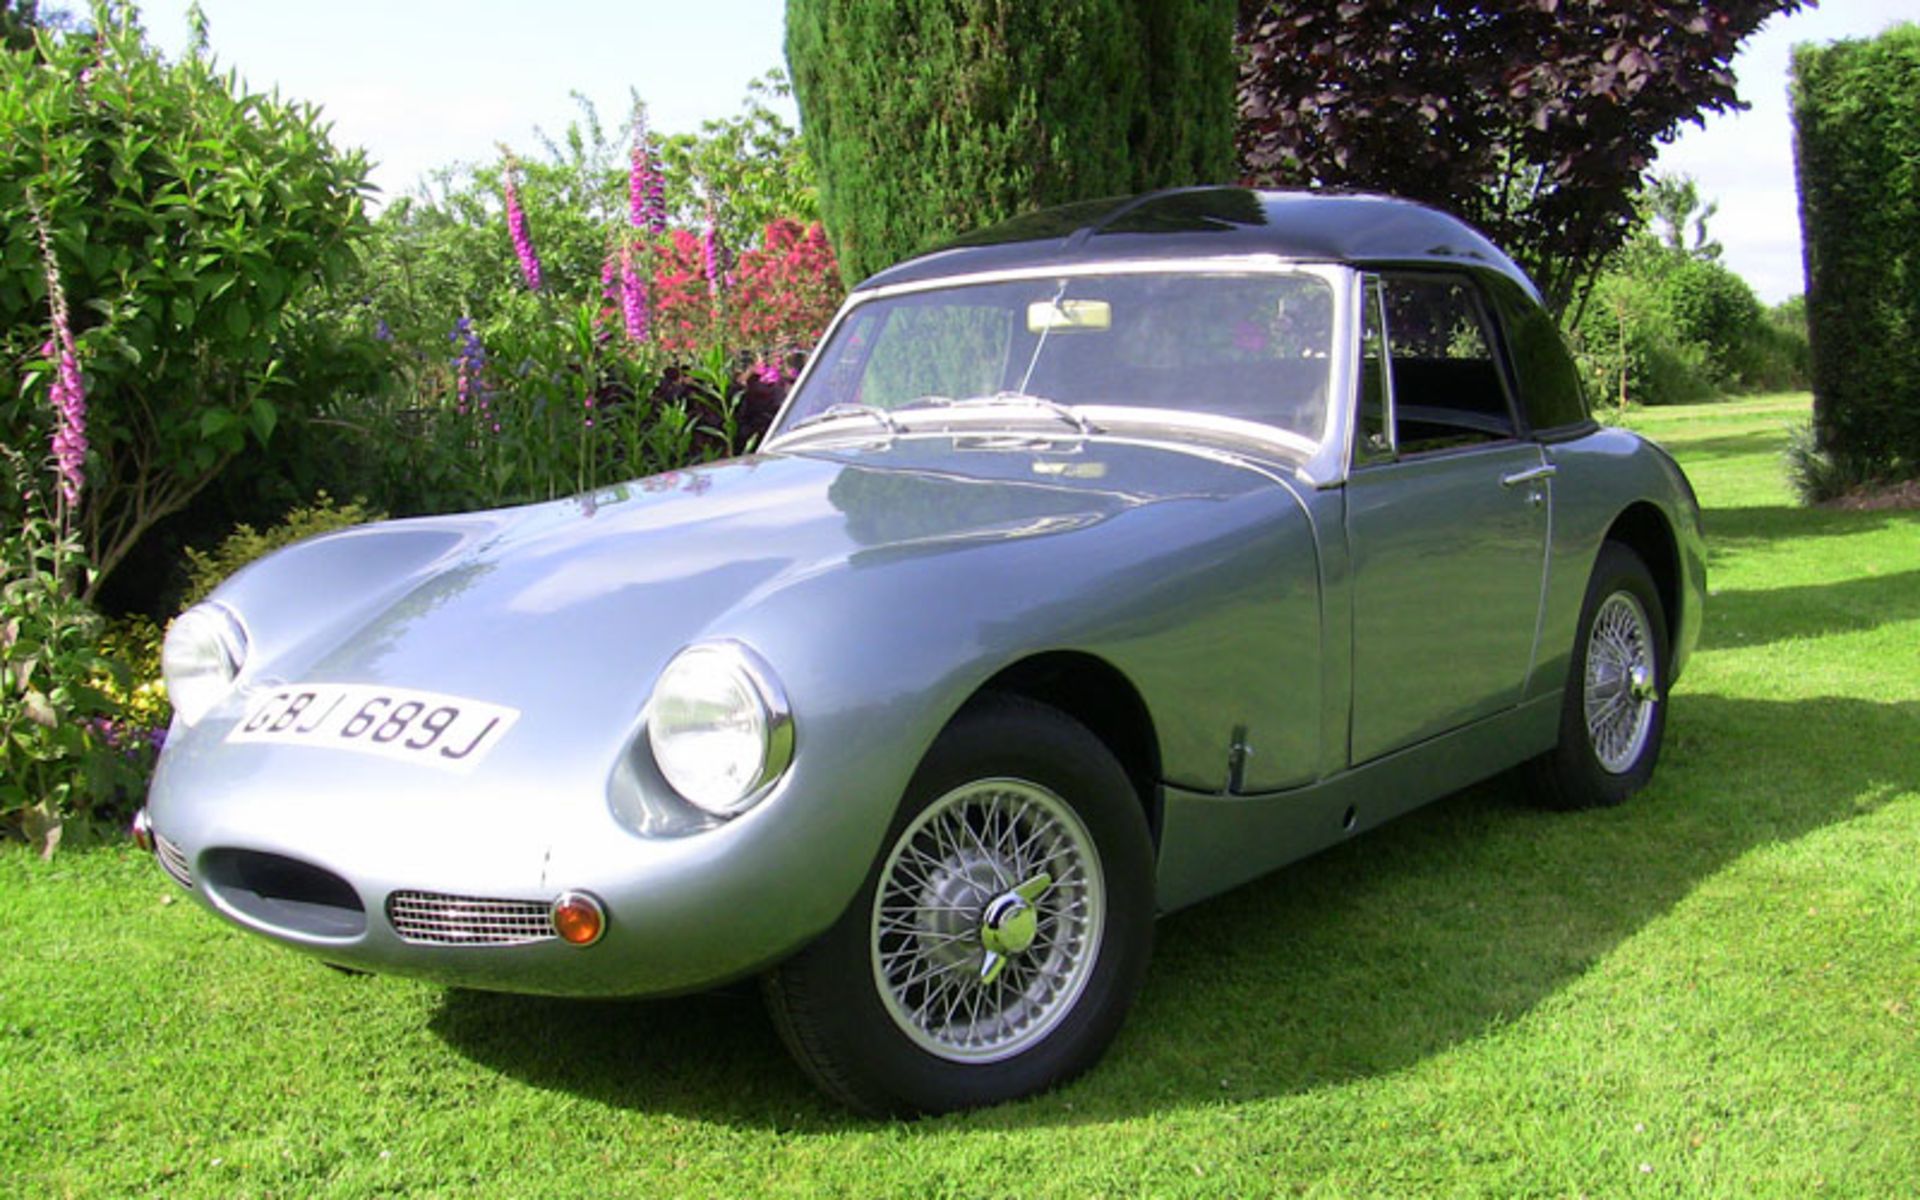 - Extensively restored and modified by Severn Classics

- Speedwell Monza-style bonnet, Dan Dare